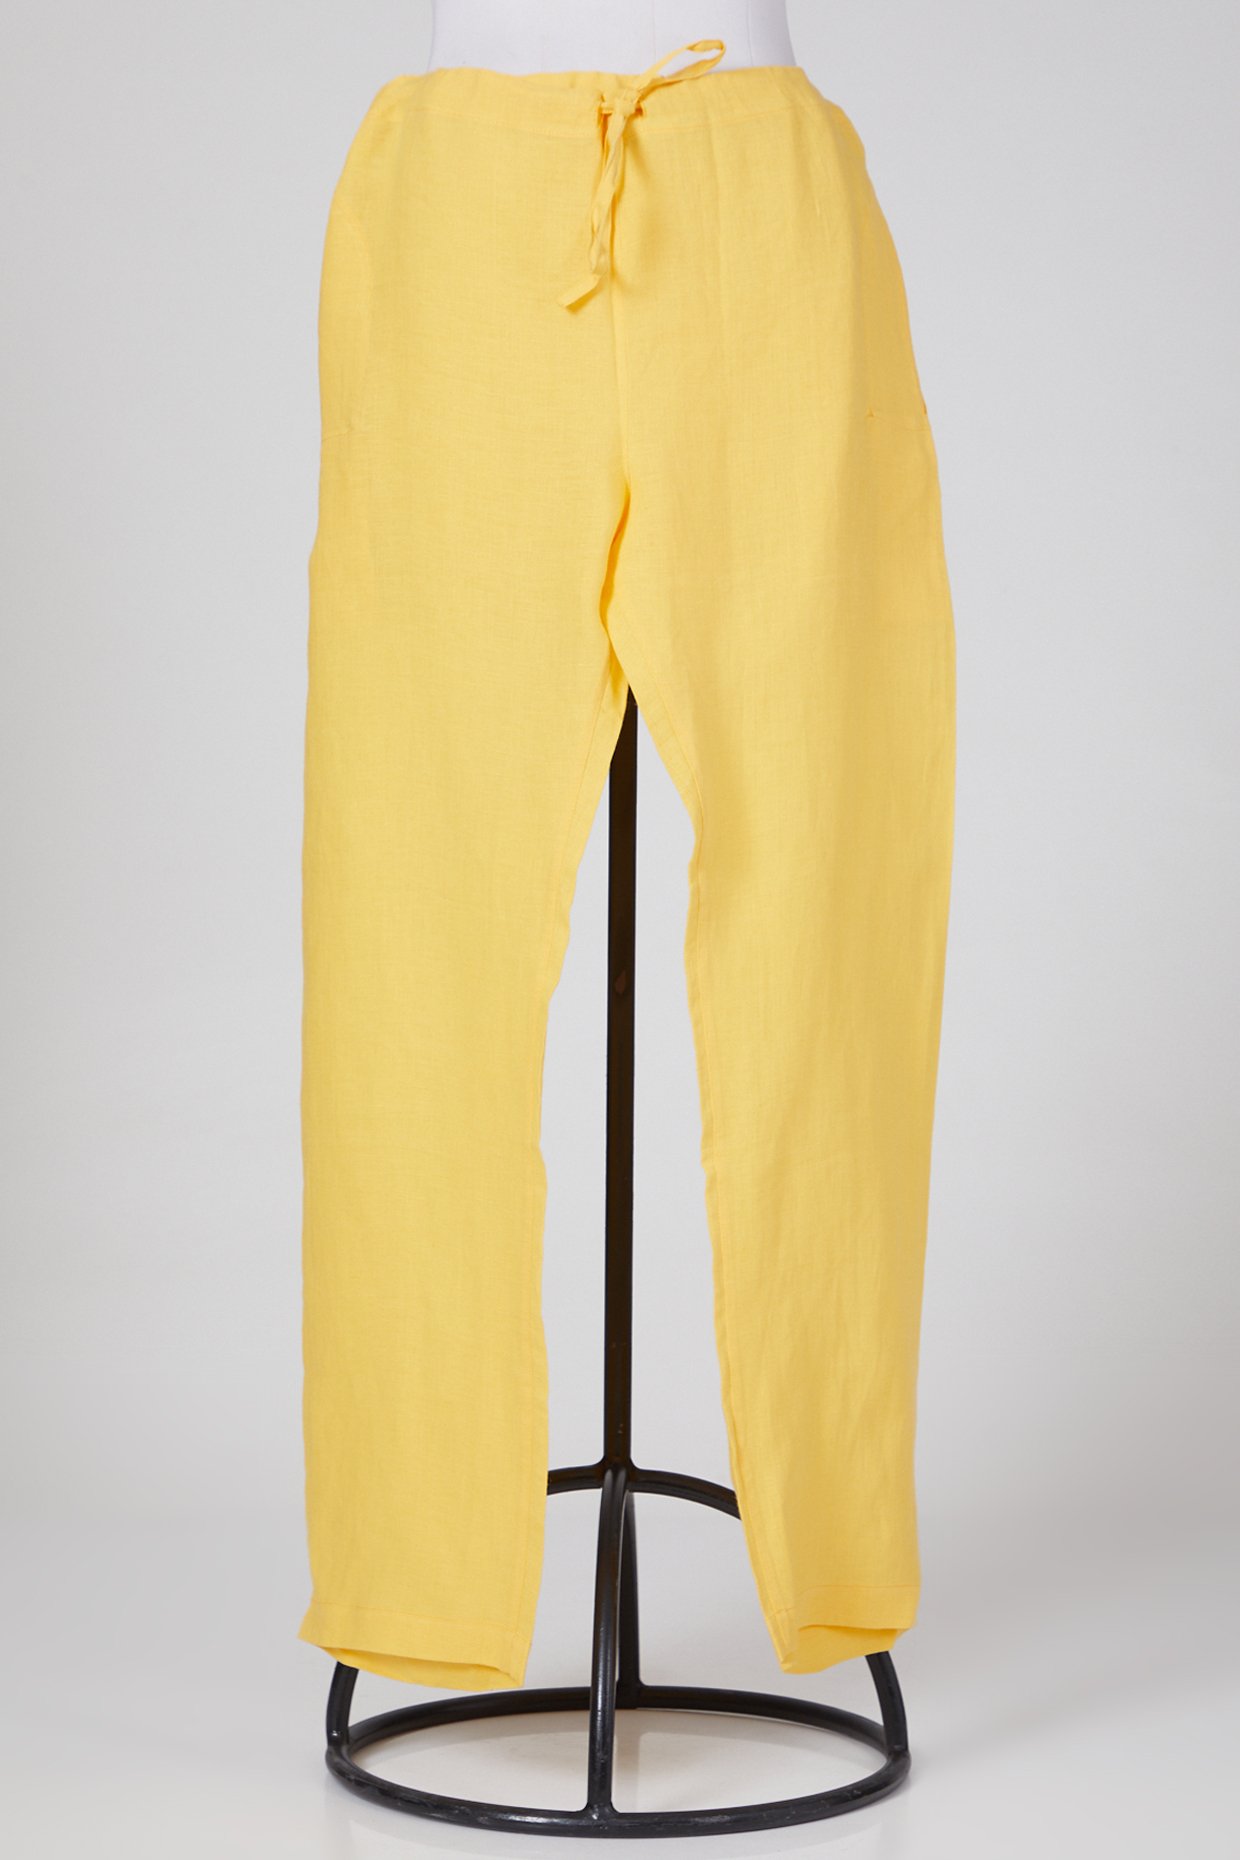 Buy Mustard Yellow Cotton Viscose Linen Pants with Belt  GSP1GNS3  The  loom